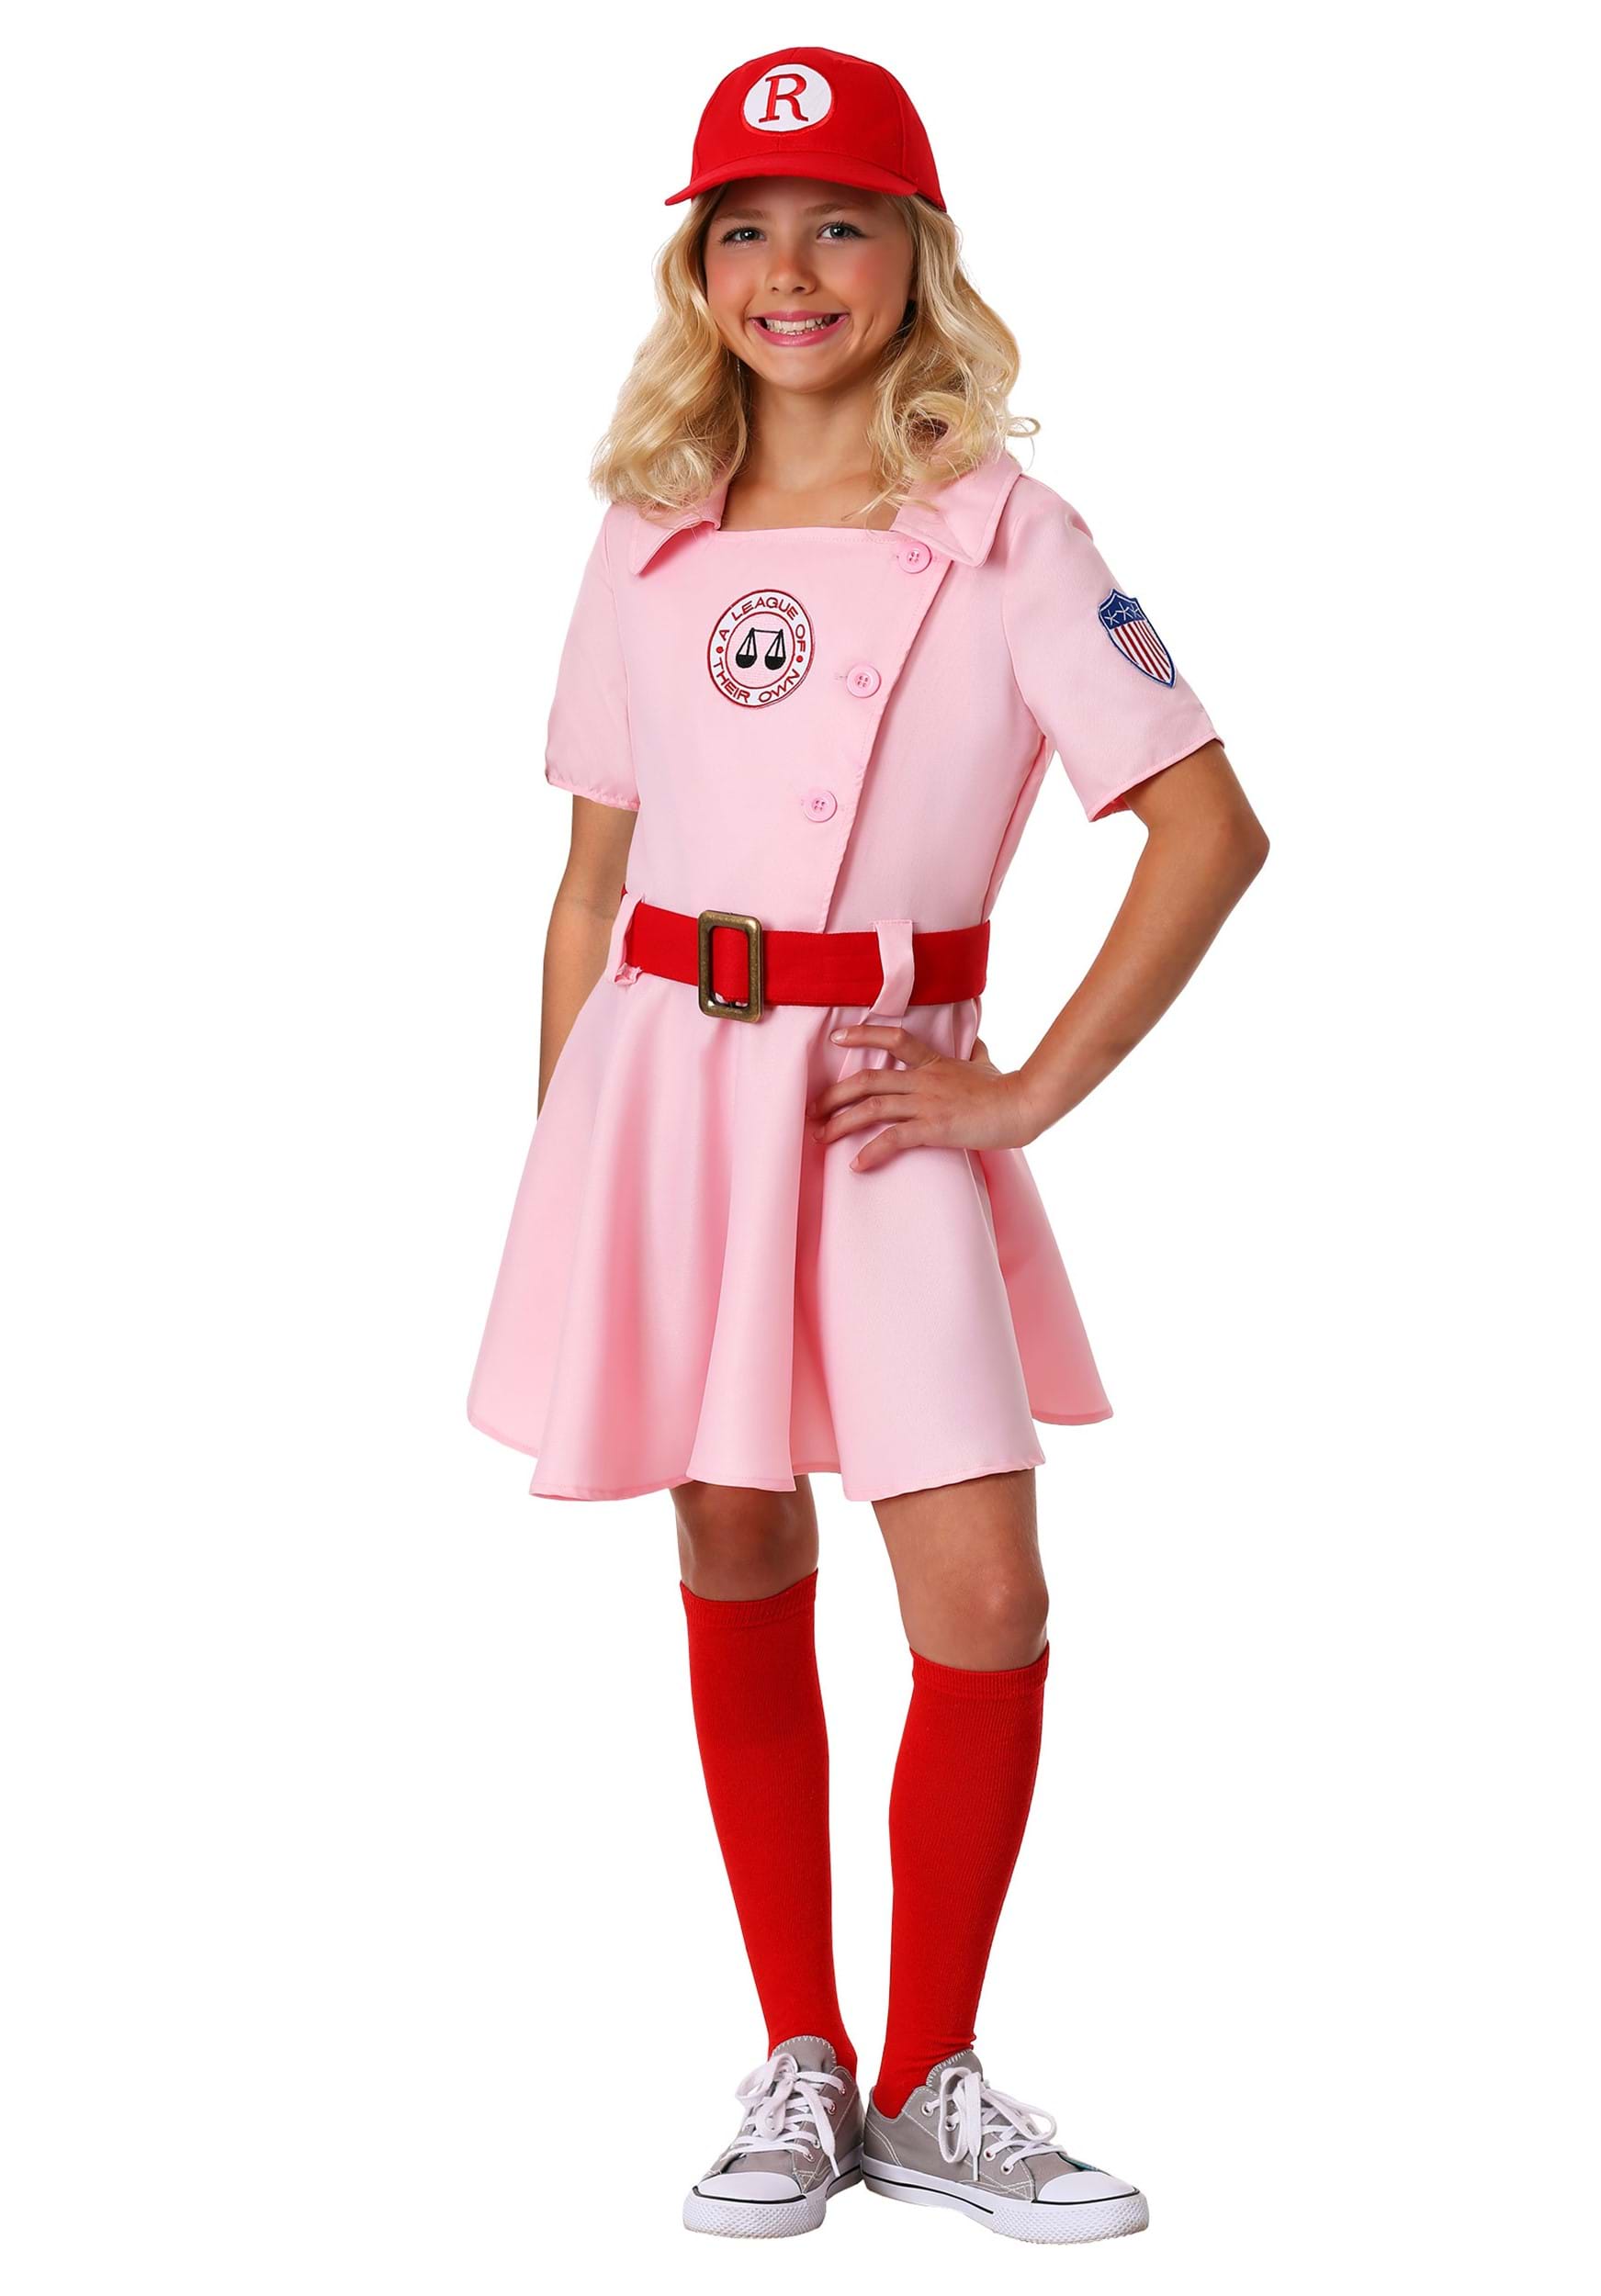 Photos - Fancy Dress League FUN Costumes Girls A  of Their Own Dottie Costume Pink/Red 